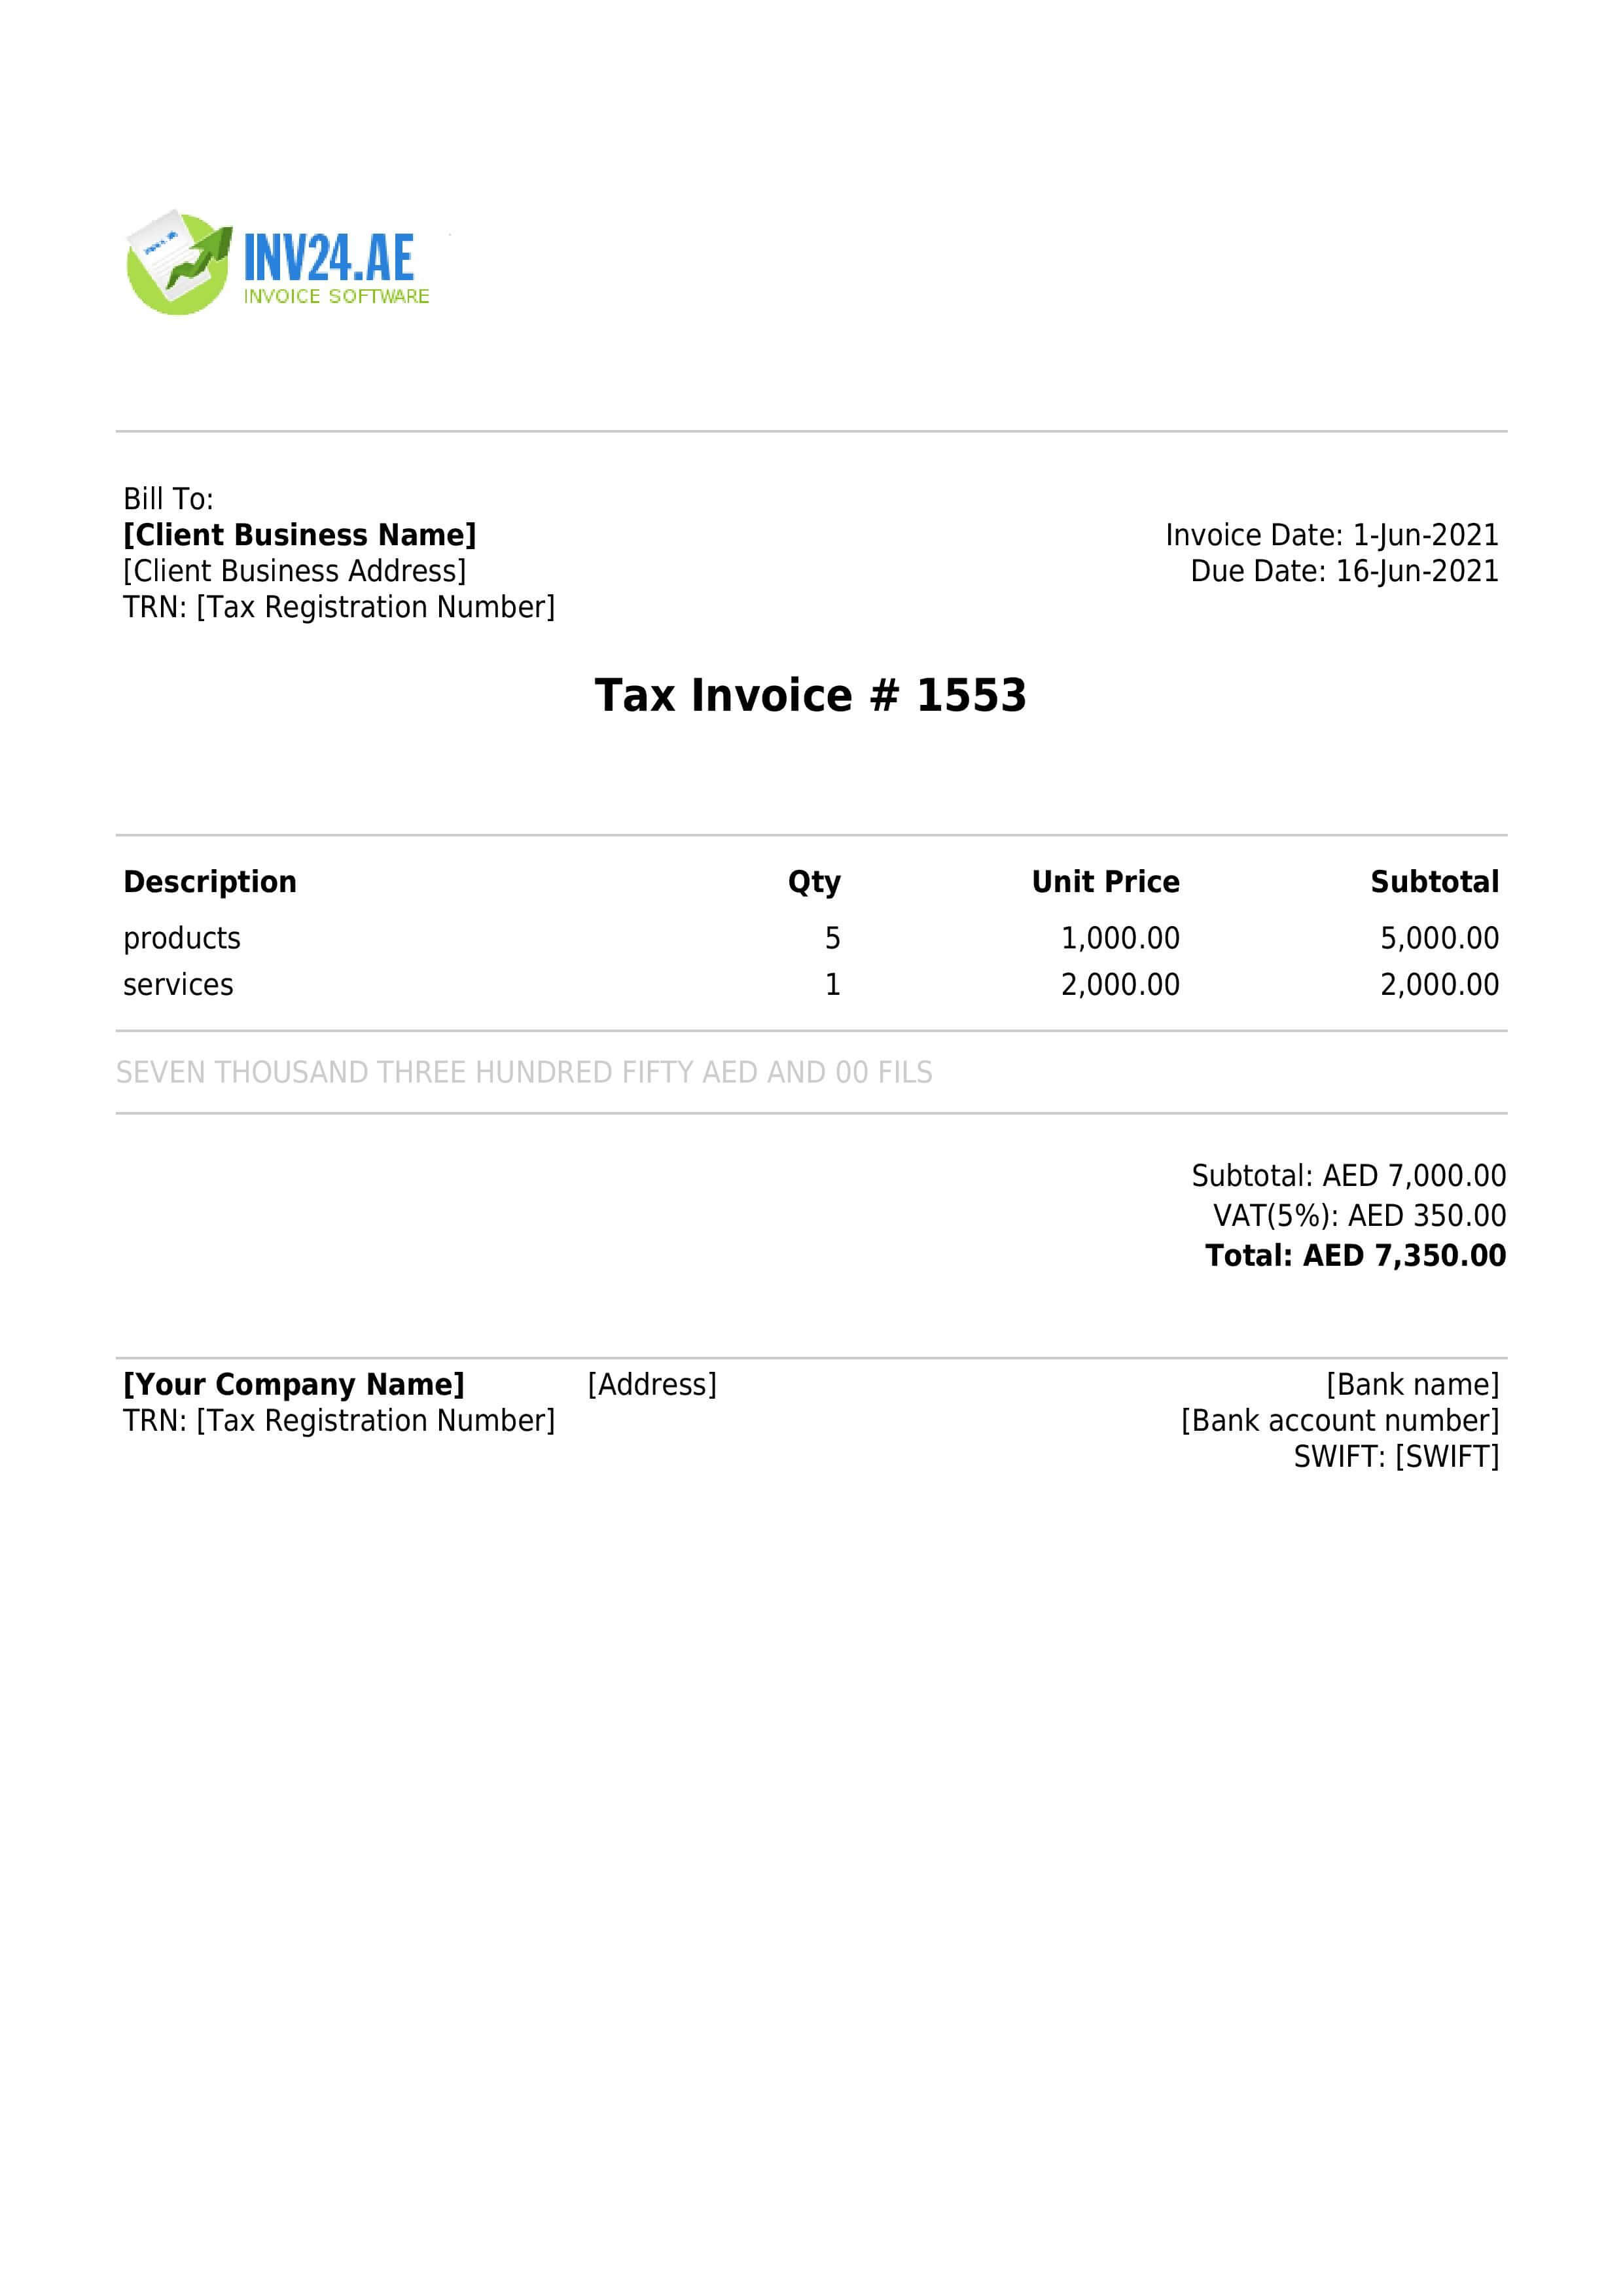 An UAE invoice sample with mandatory and optional fields